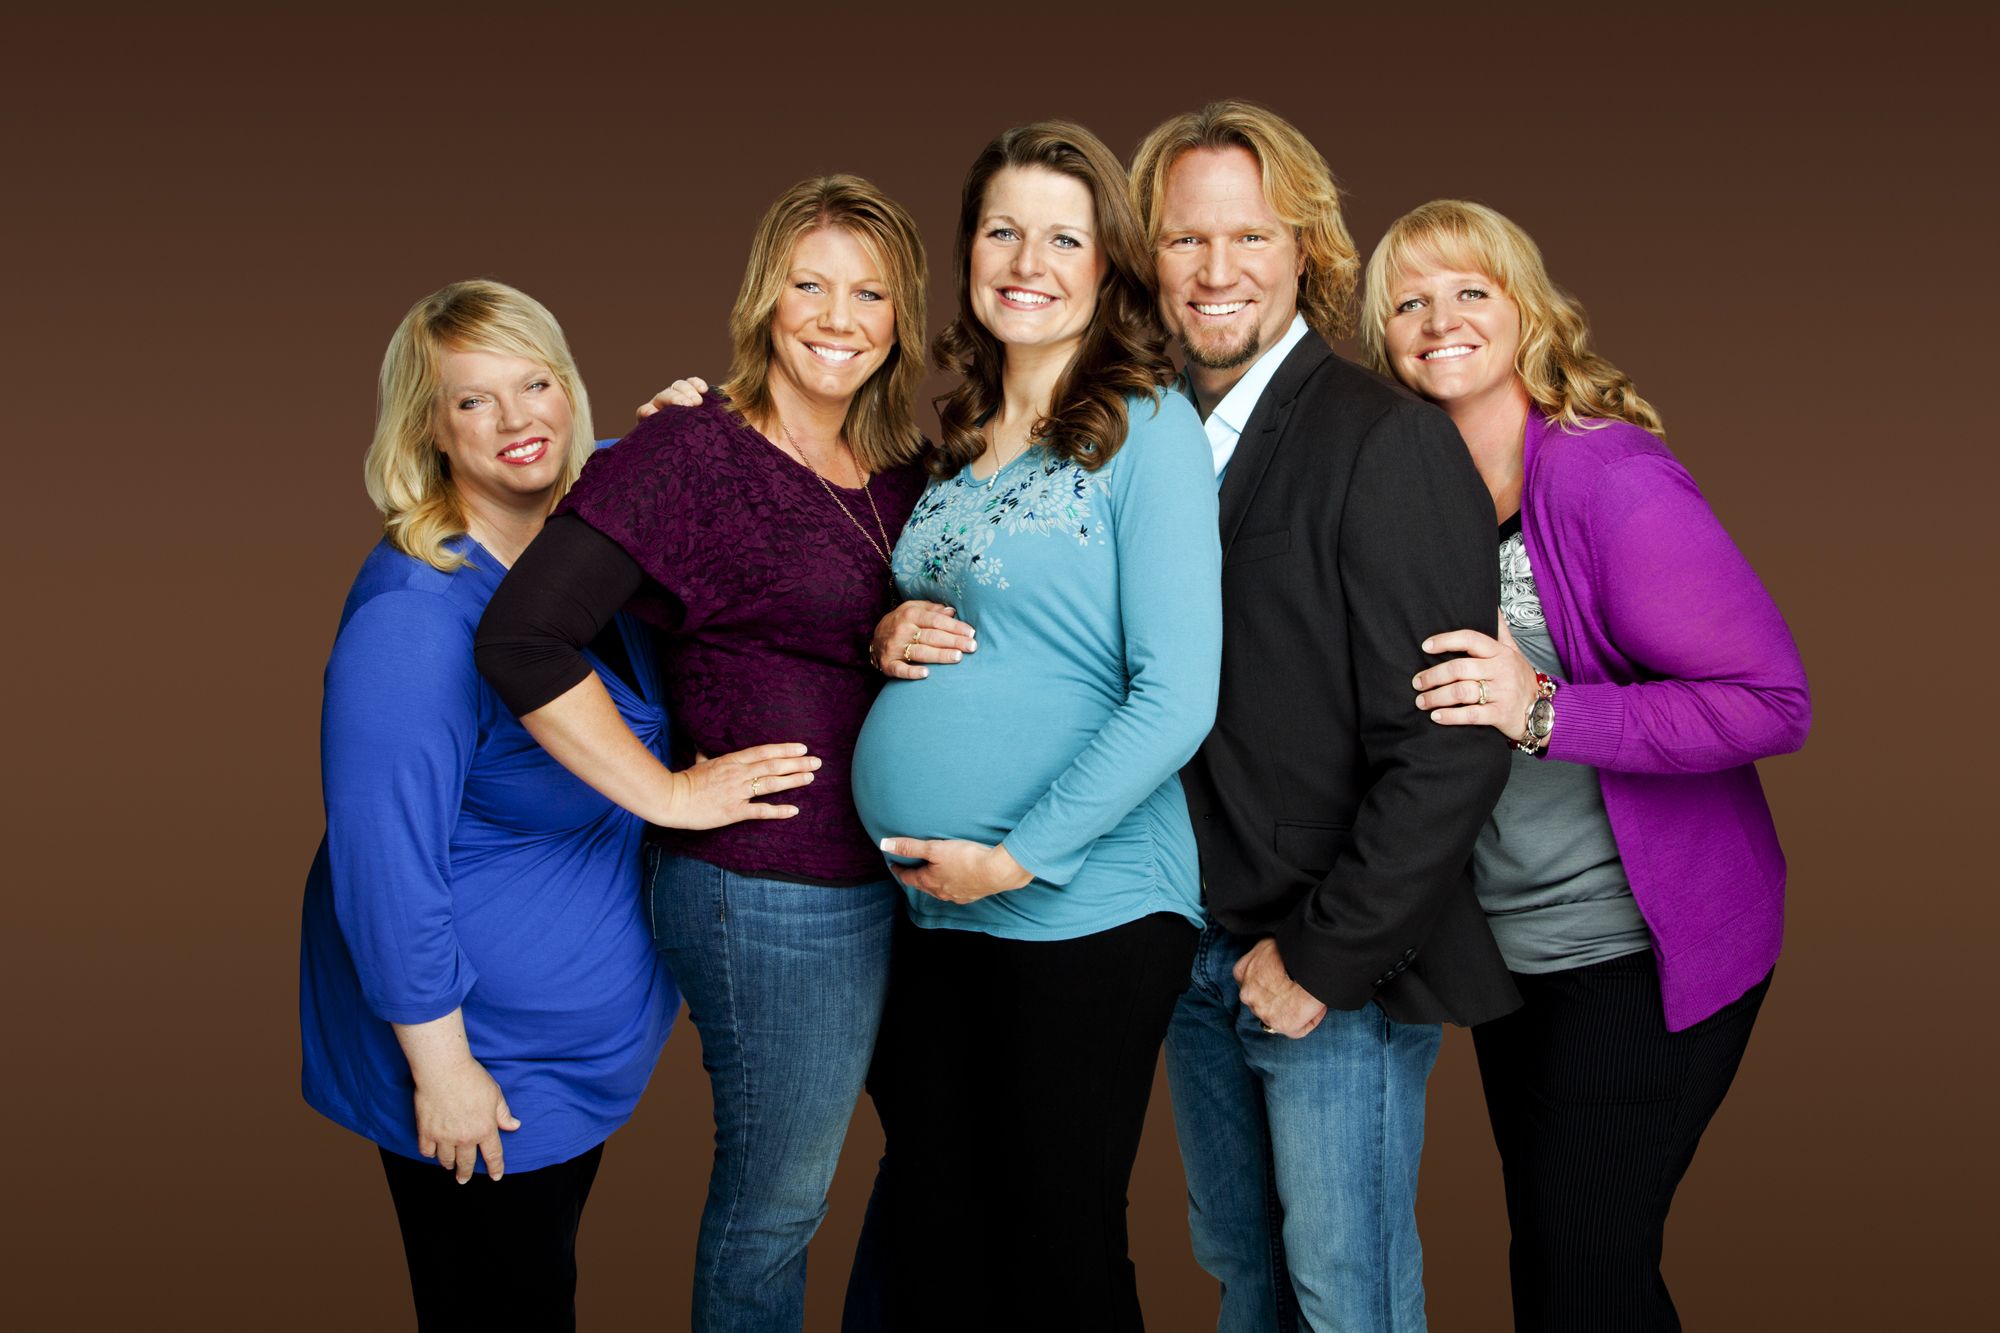 Sister Wives' star divorces wife, weds wife | CNN